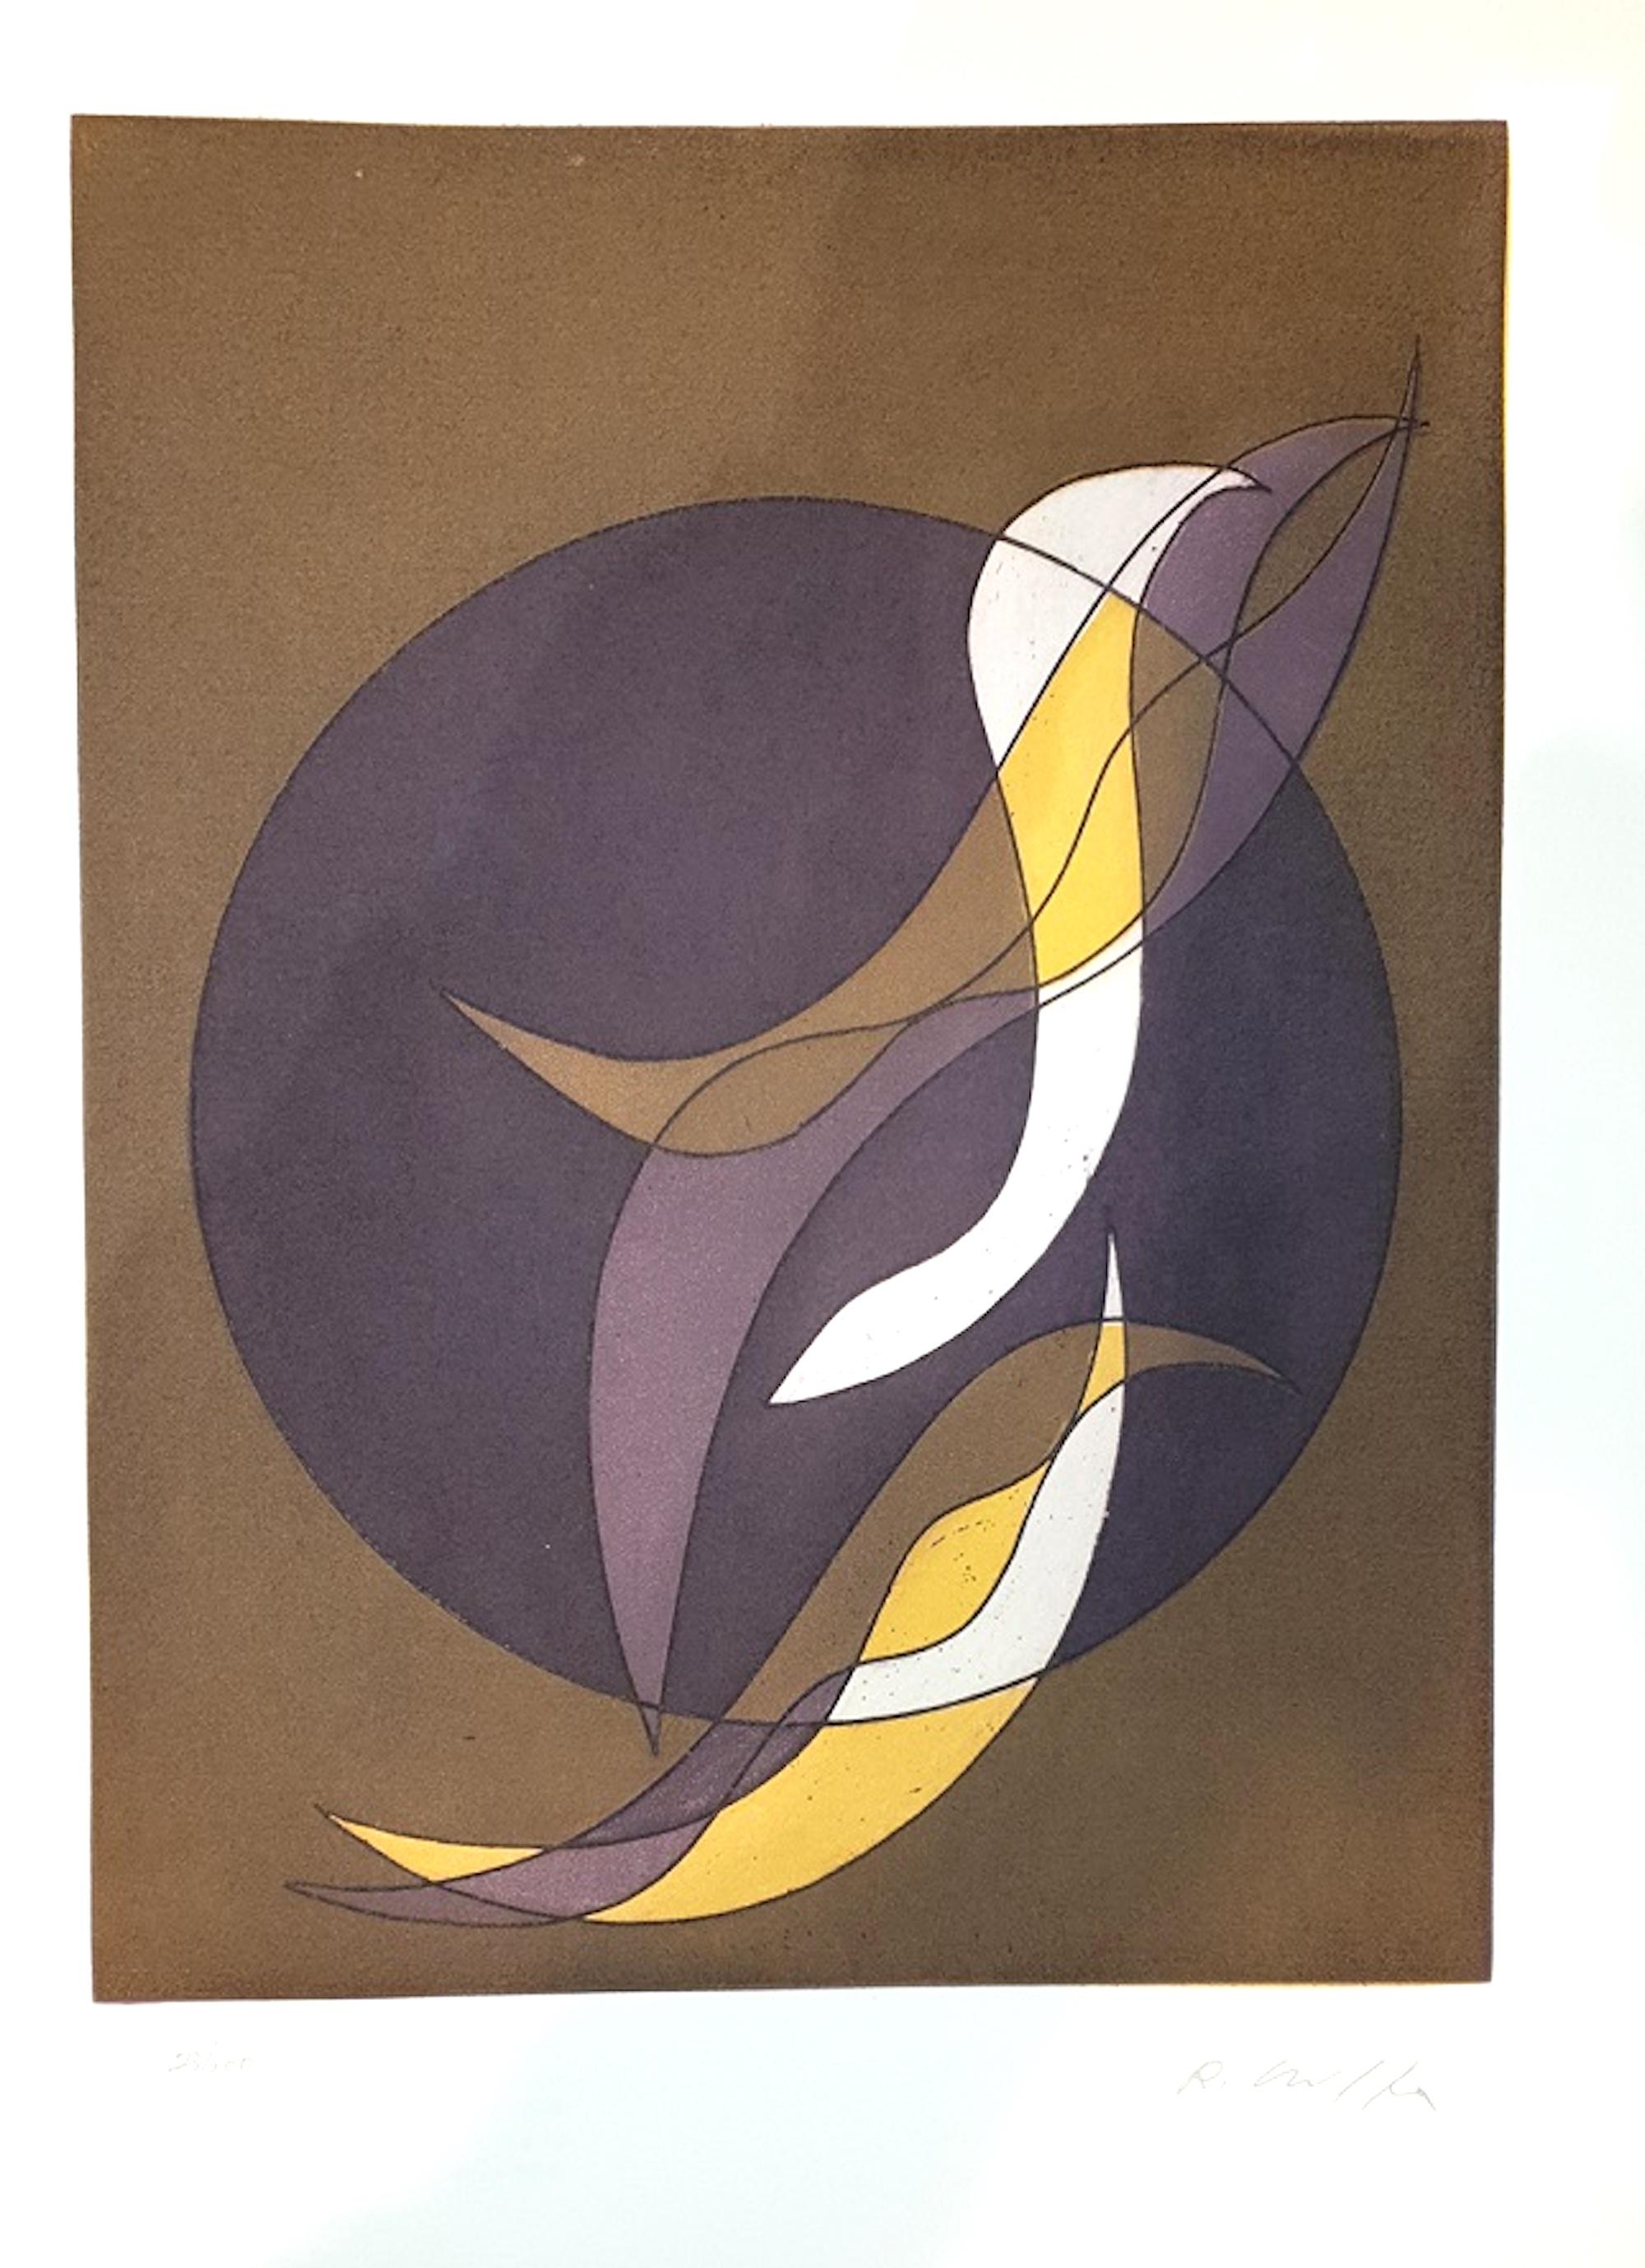 Roberto Crippa Abstract Print - Plate VI from Suns/Landscapes -Etching by R. Crippa - 1971/72